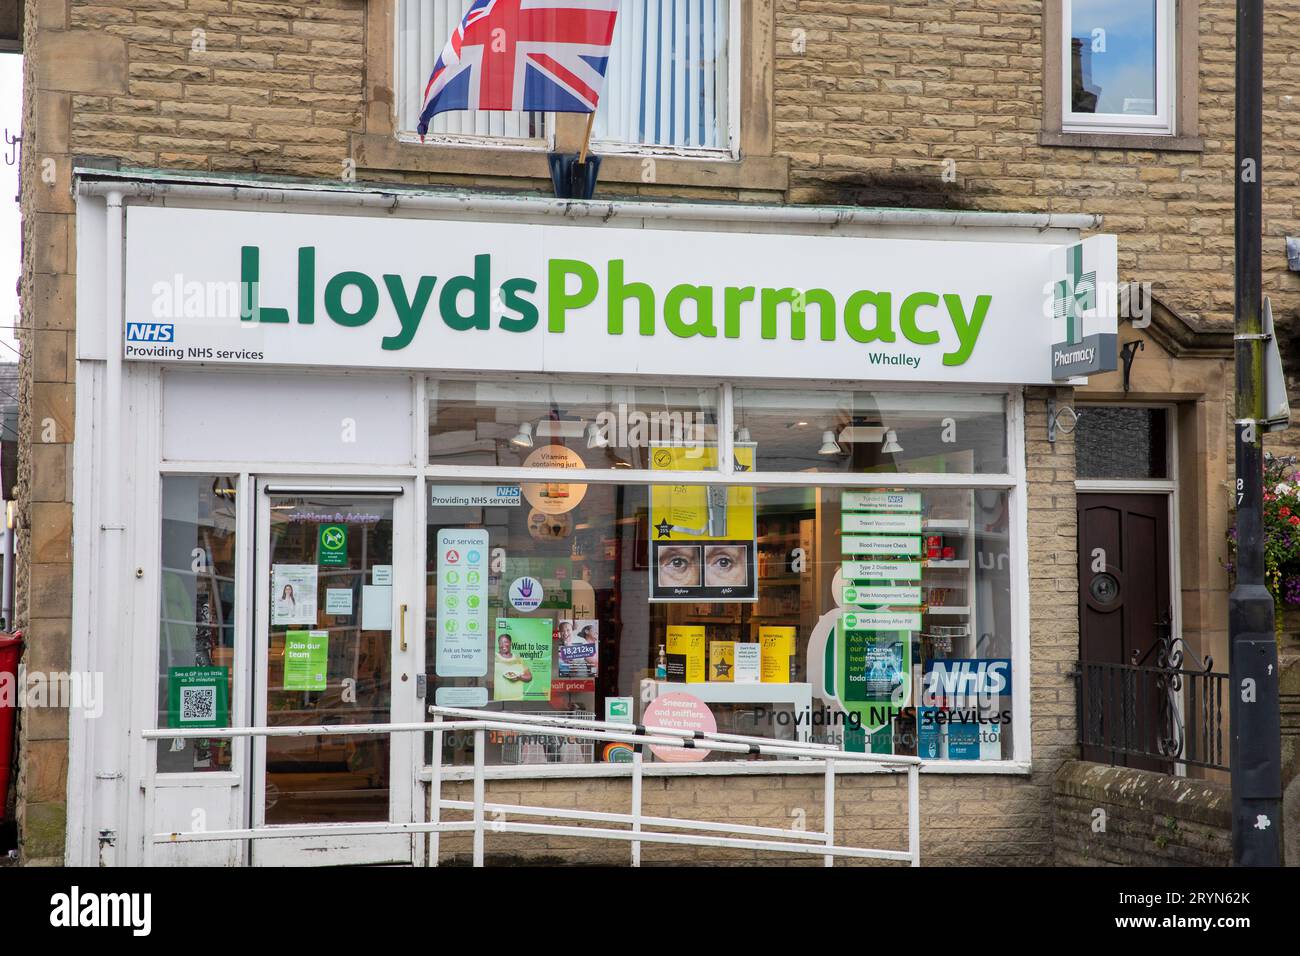 Lloyds pharmacy chemist store in Whalley town centre,Lancashire,England,UK Stock Photo